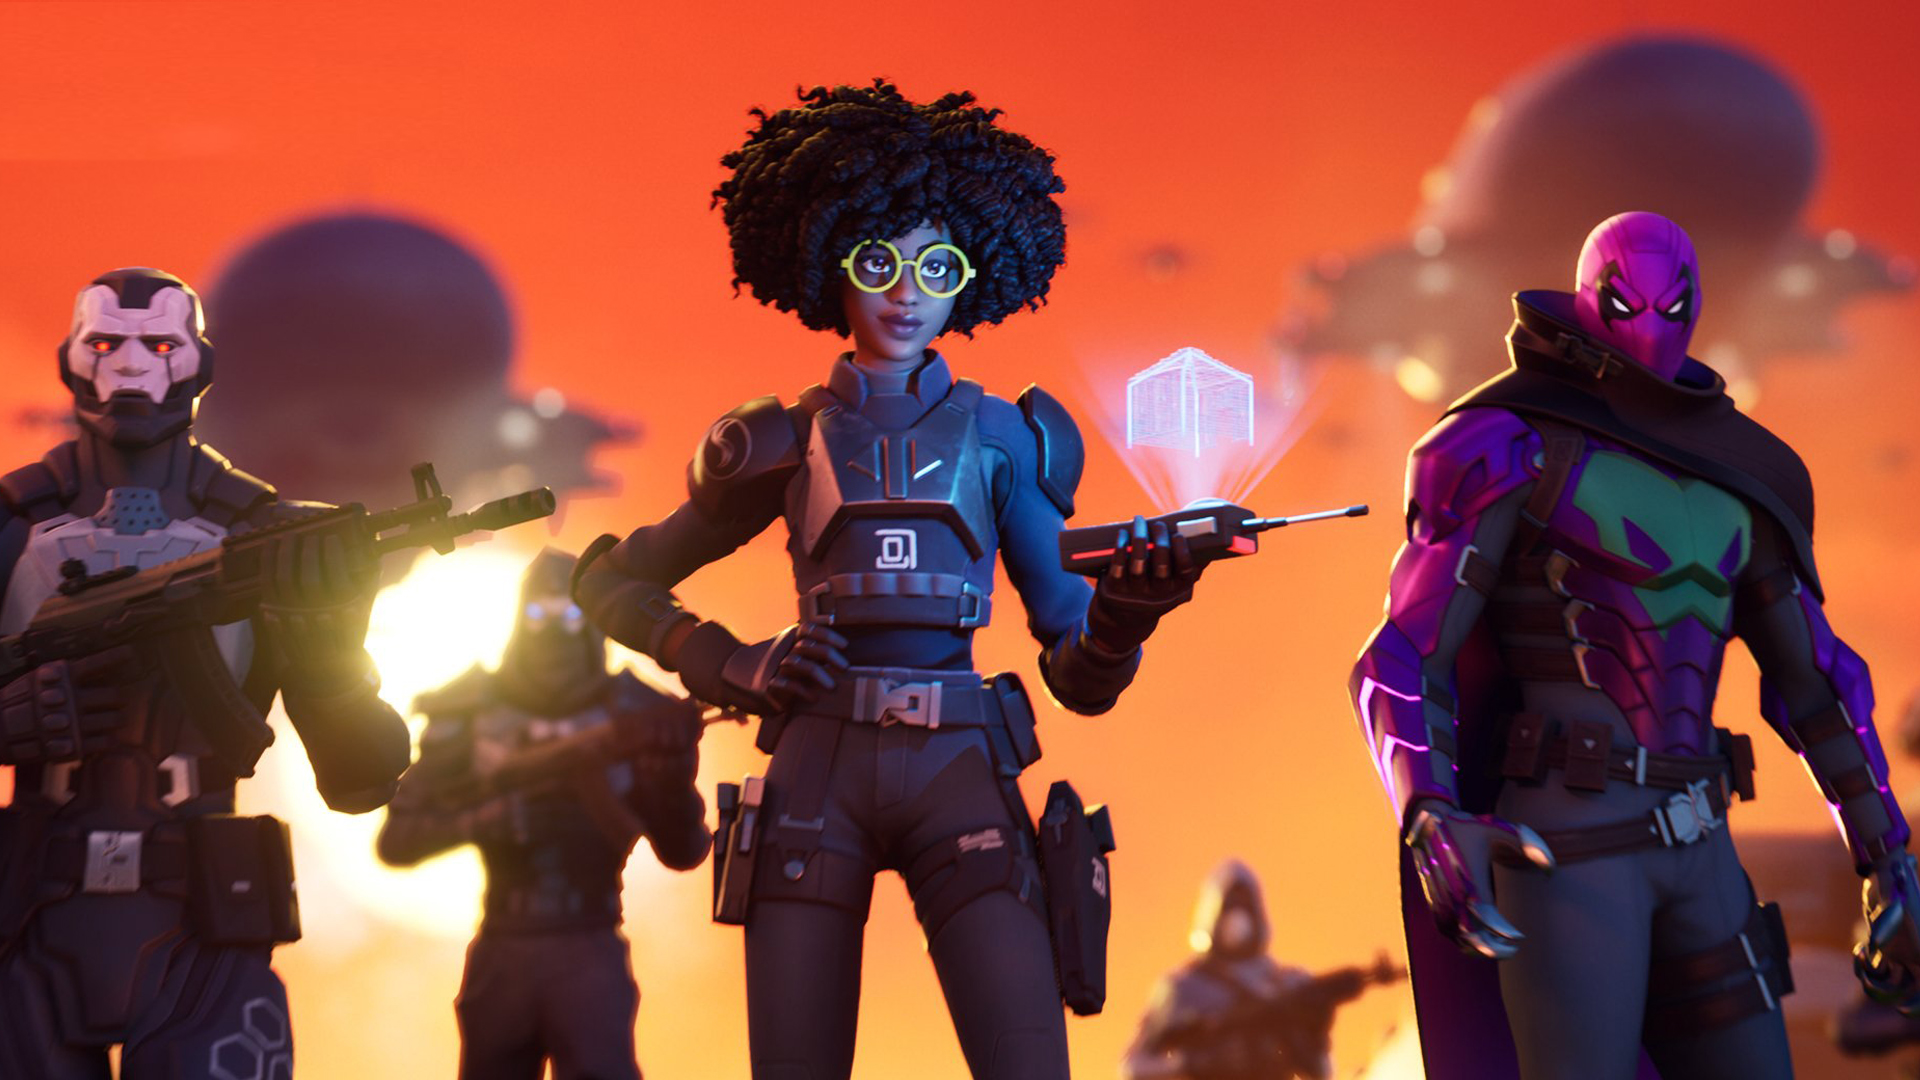 It looks like a Fortnite PvE battle event is coming